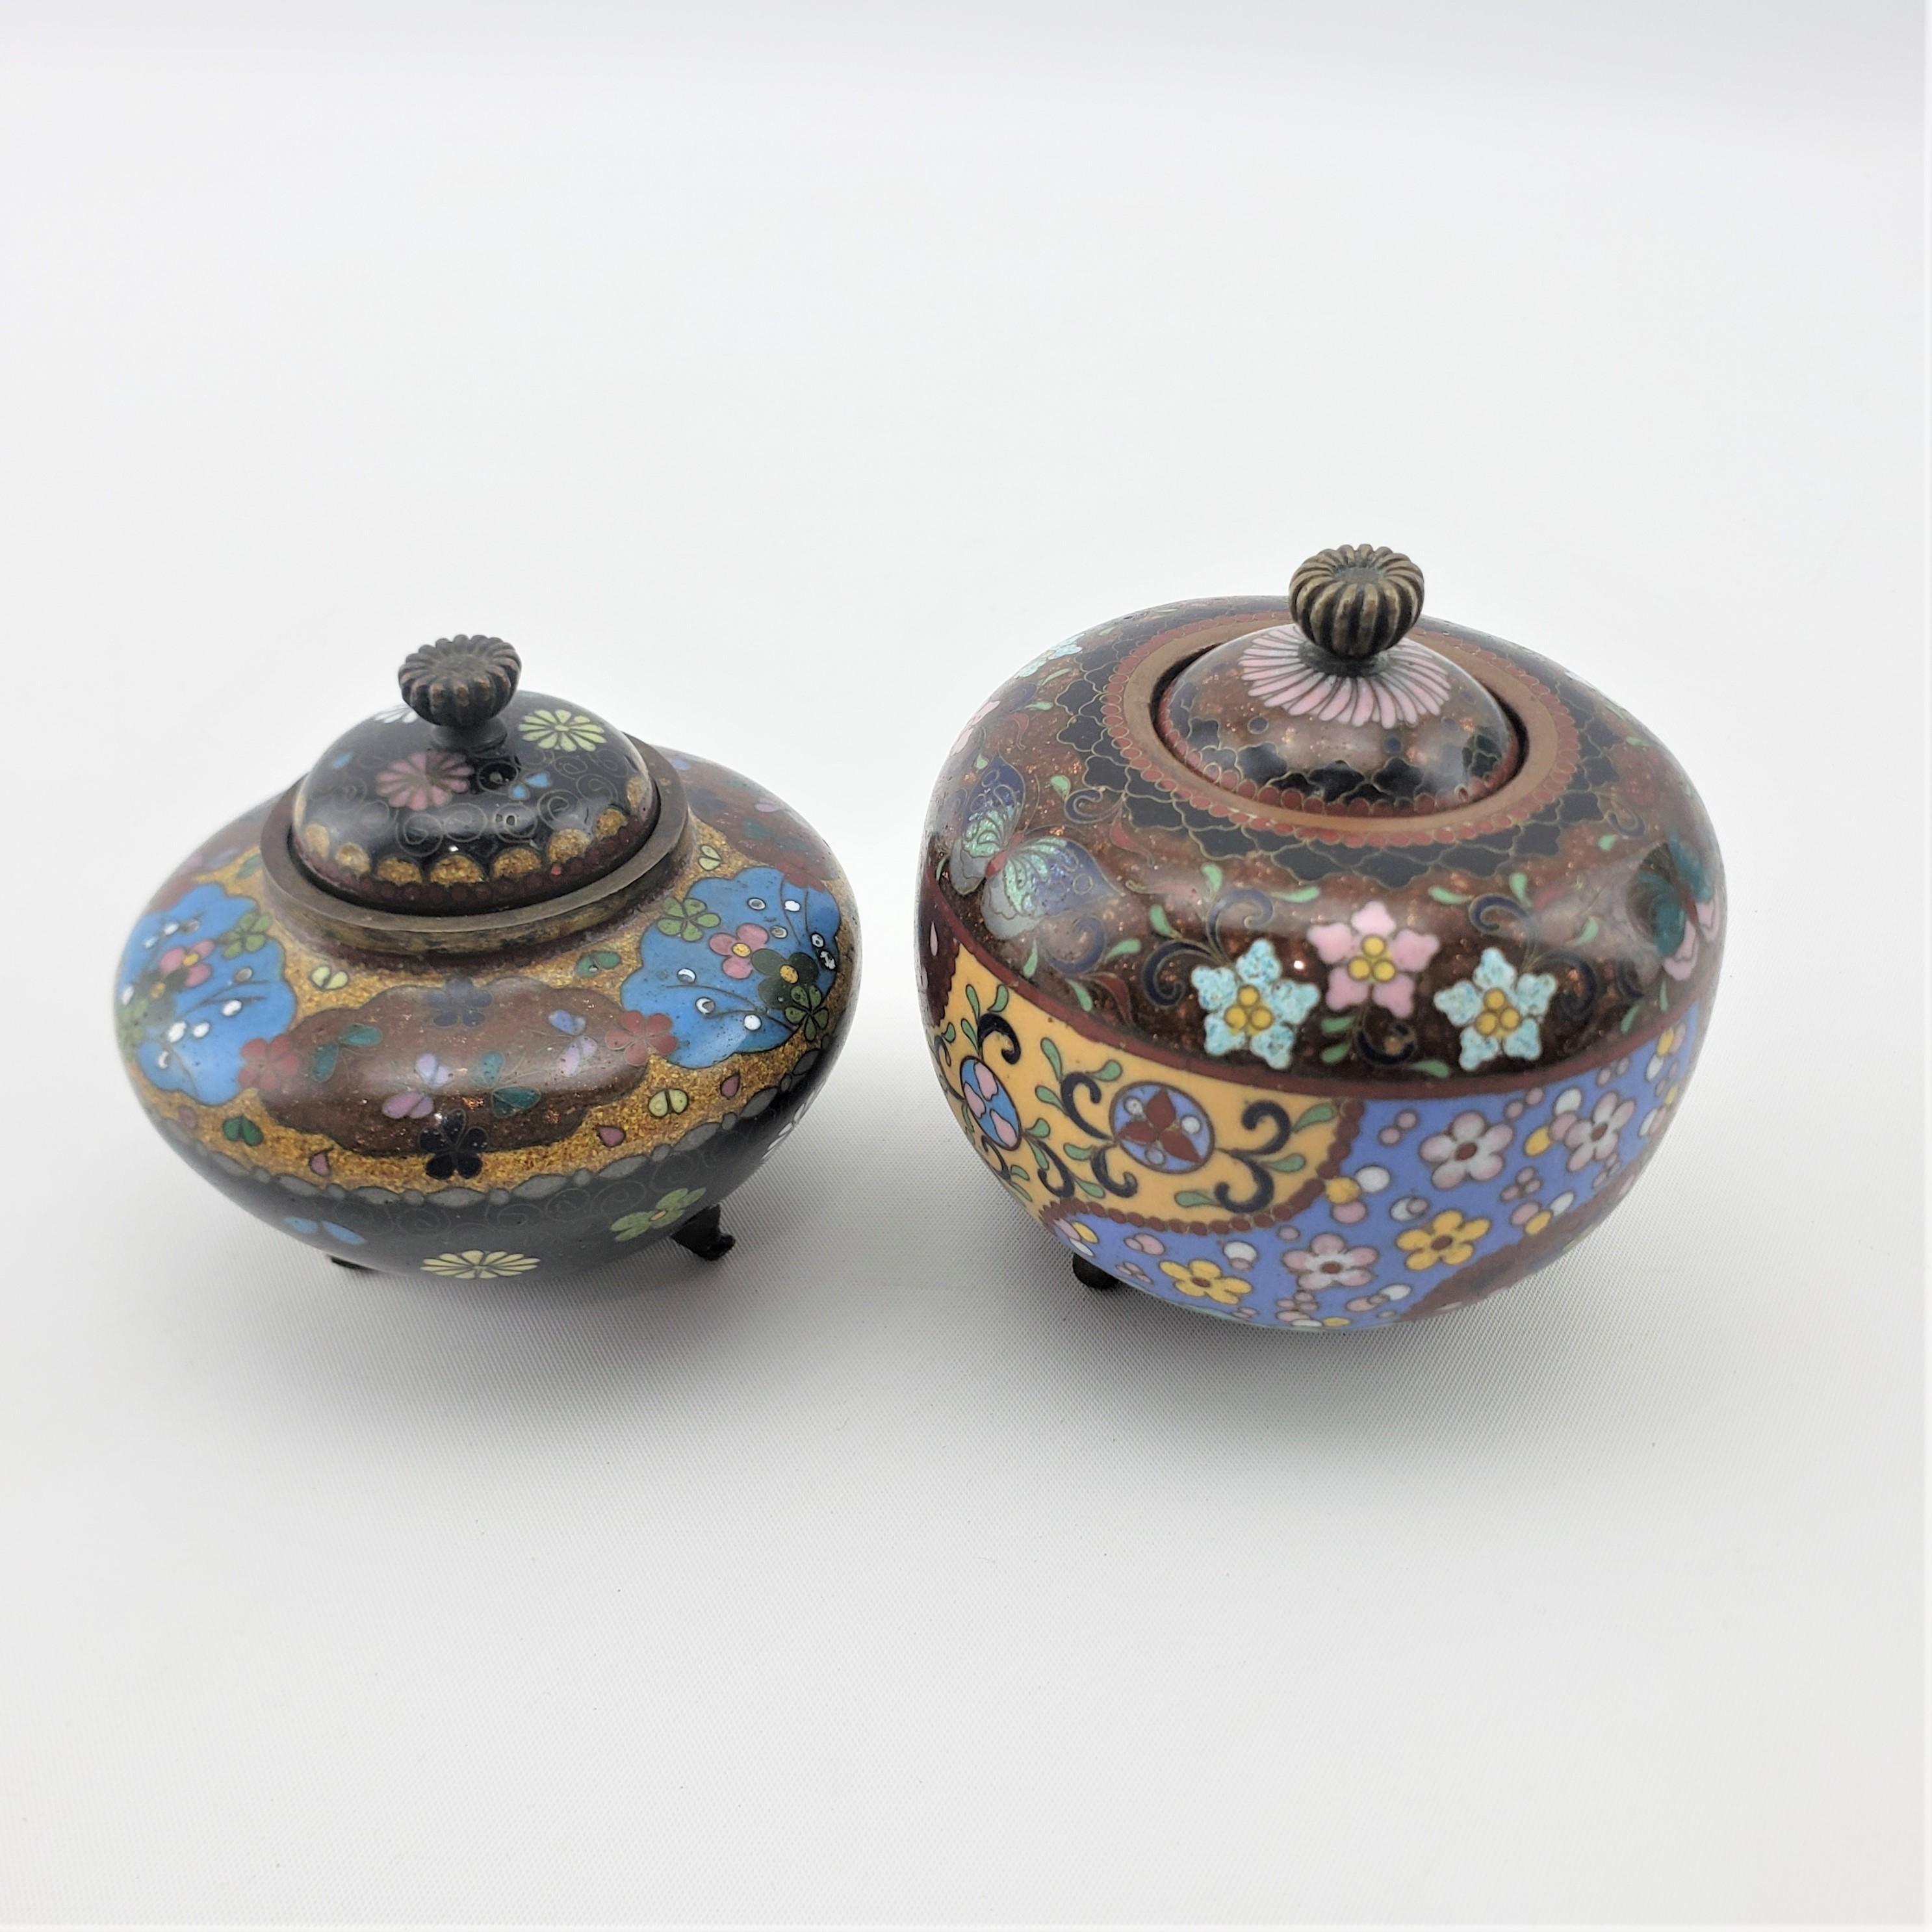 20th Century Pair of Antique Japanese Cloisonne Covered Jars with Floral Motif Decoration For Sale